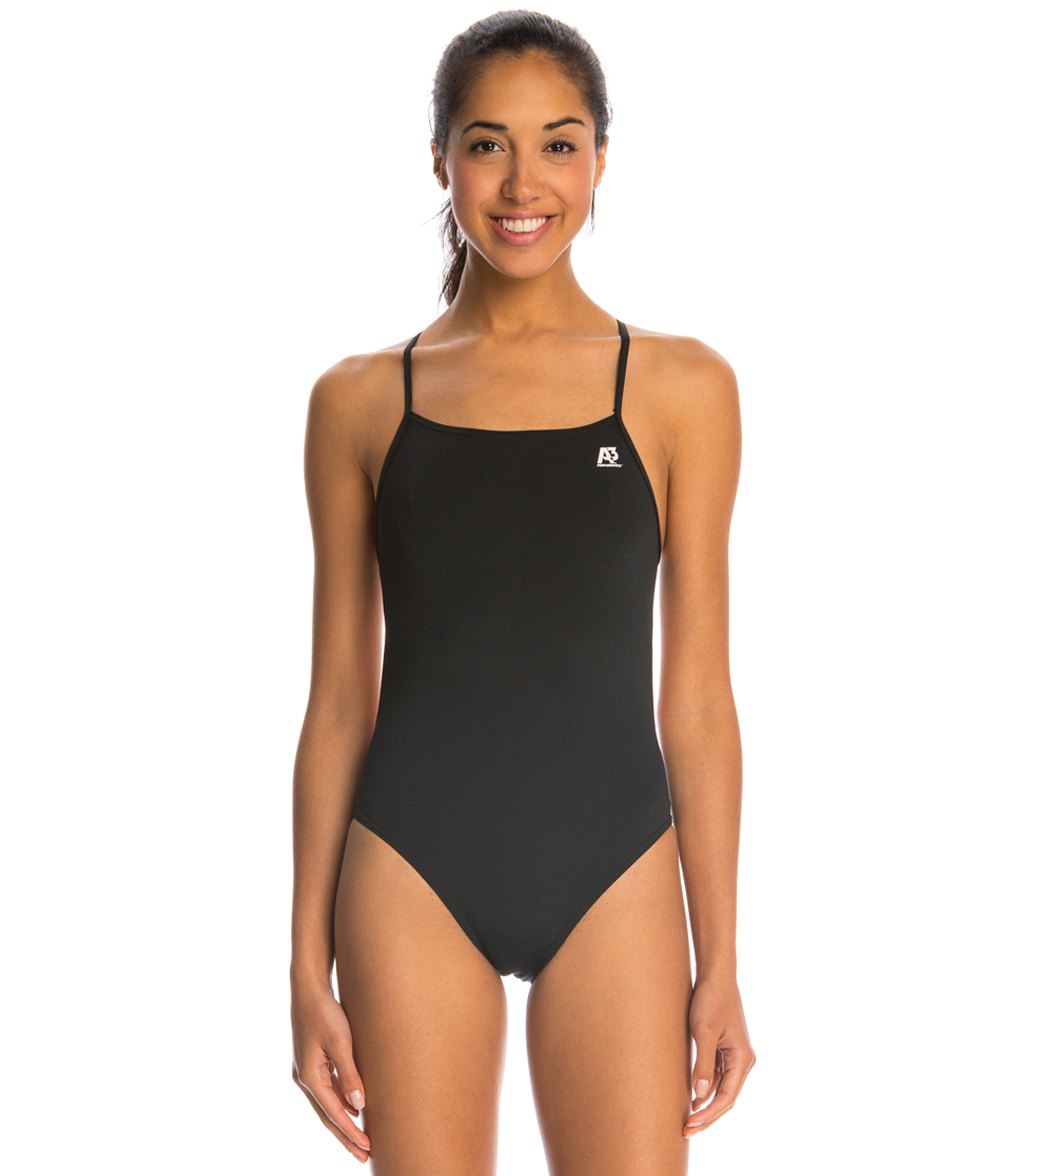 A3 Performance Flash Back One Piece Swimsuit - Black 24 Polyester/Pbt - Swimoutlet.com